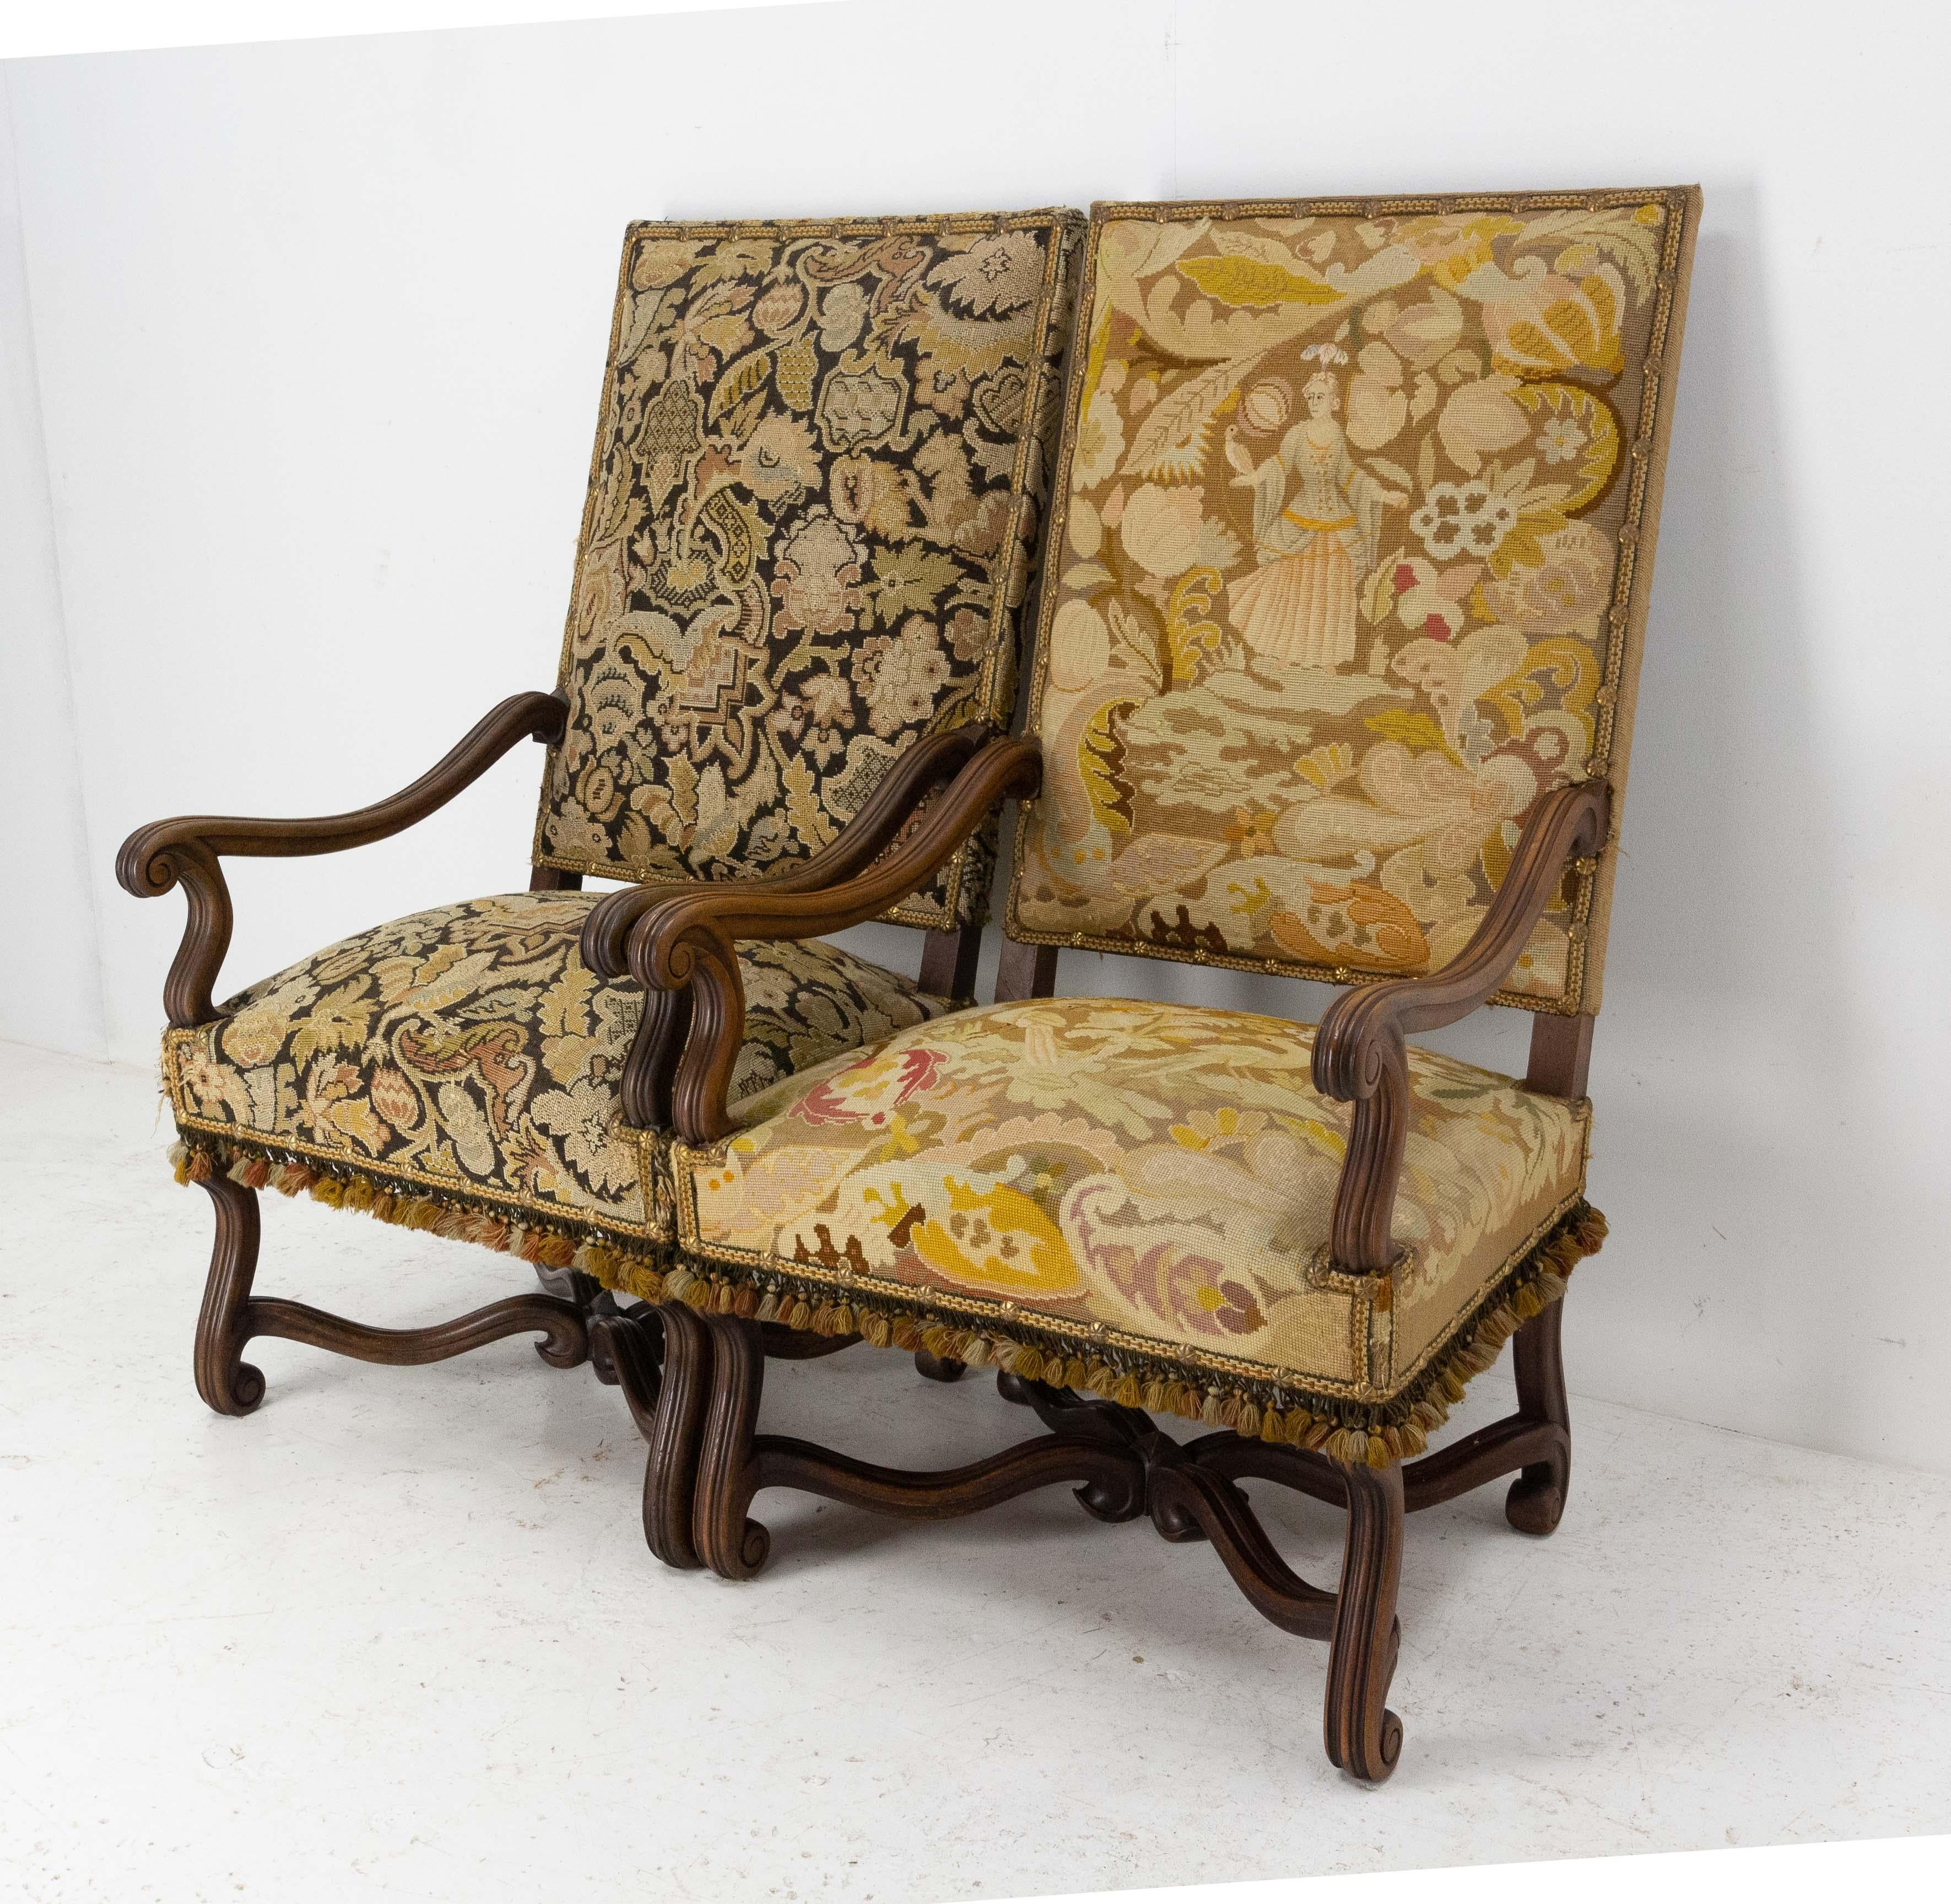 Louis XIV Pair of Louis XIII Revival Open Armchairs French, Late 19th Century to Recover For Sale